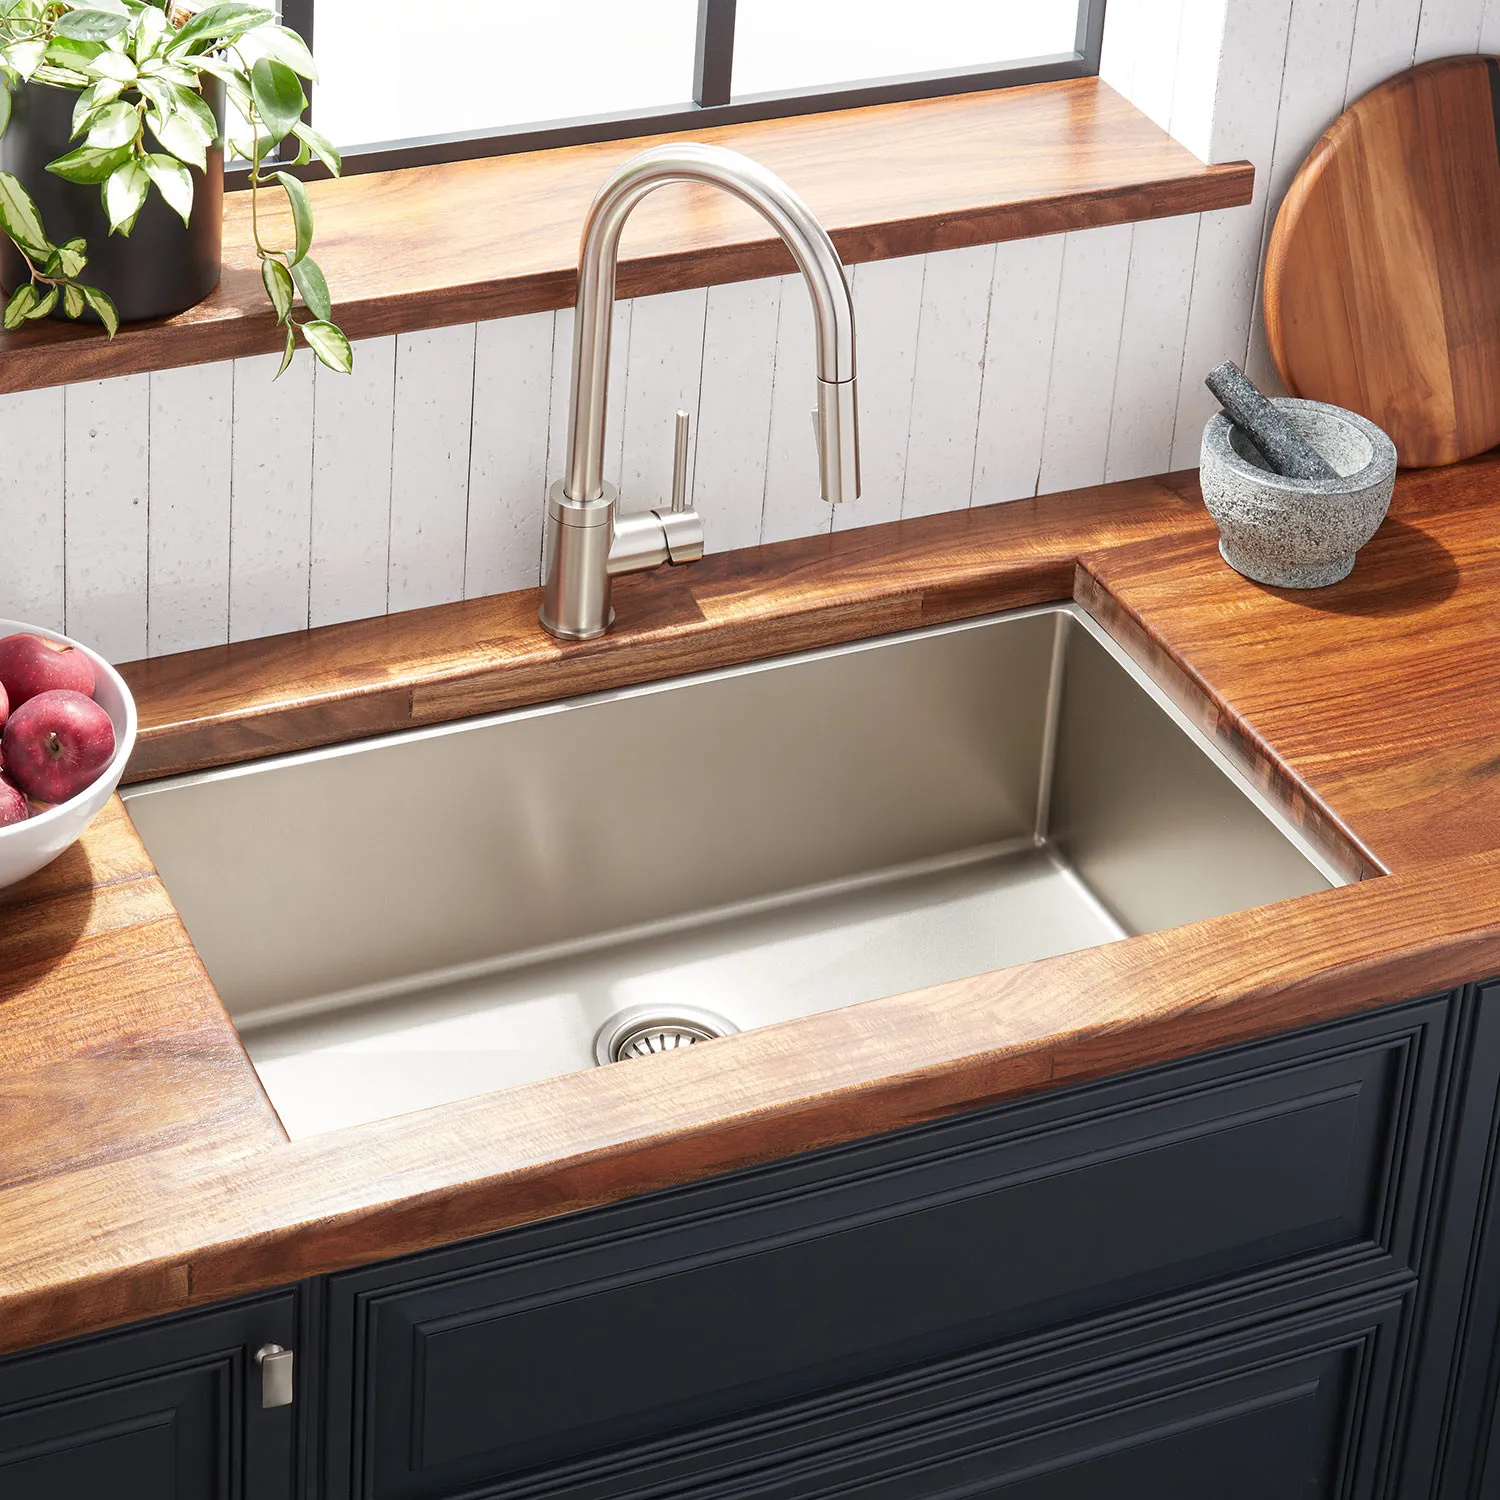 How Does An Undermount Sink Will Completely Change The Look Of Your Kitchen?